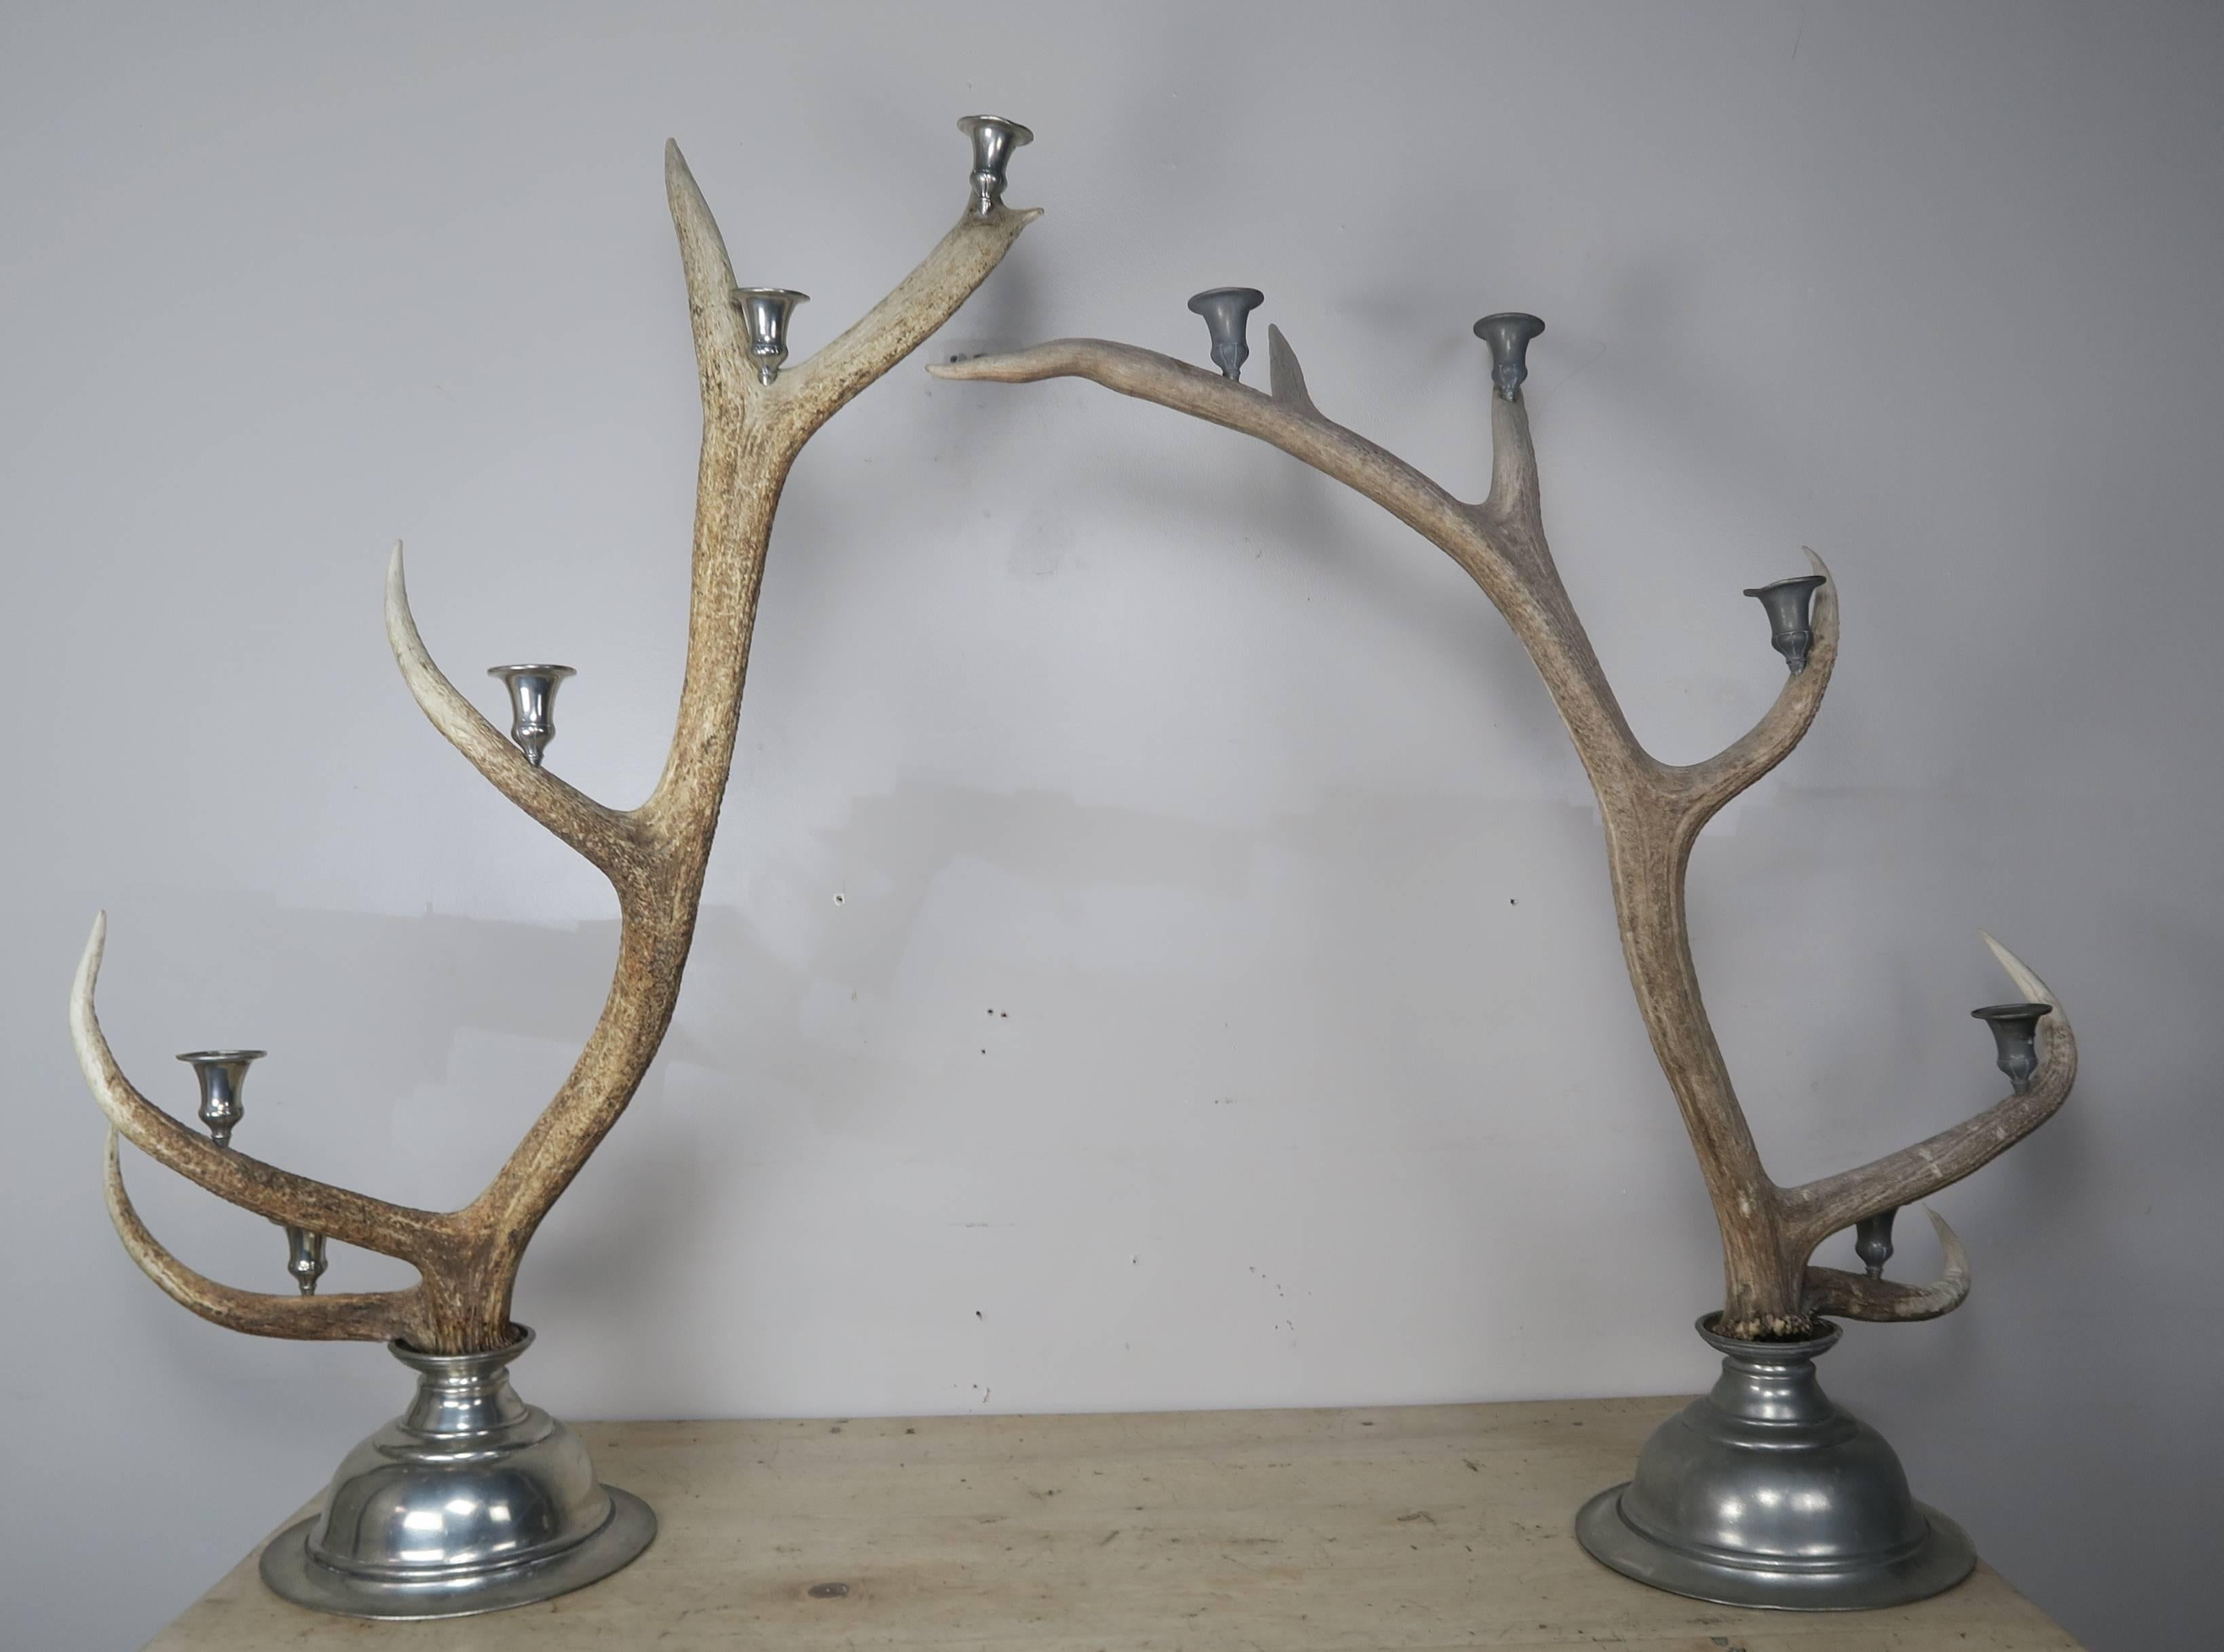 Pair of monumental English elk antler and pewter candleholders from the early 1900s.